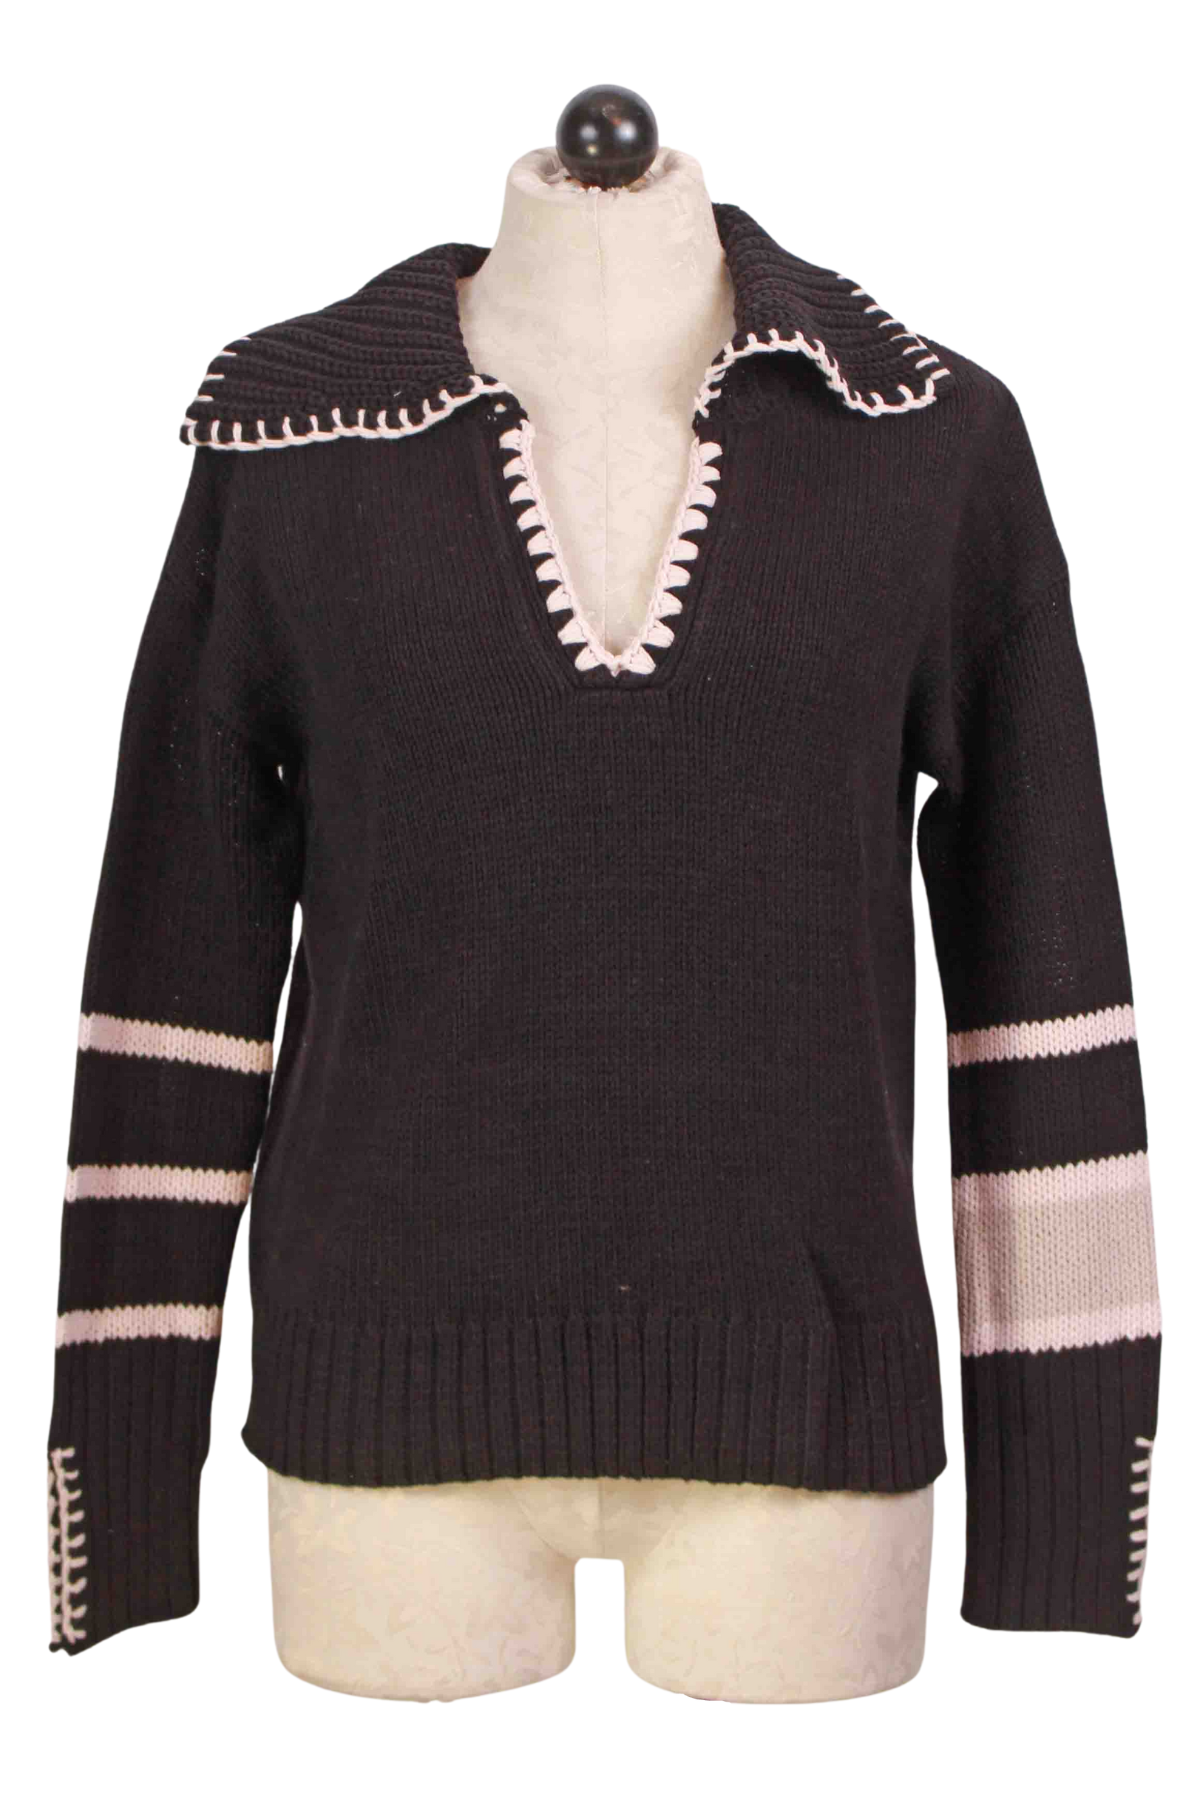 Black Collar Call Sweater by Lisa Todd 